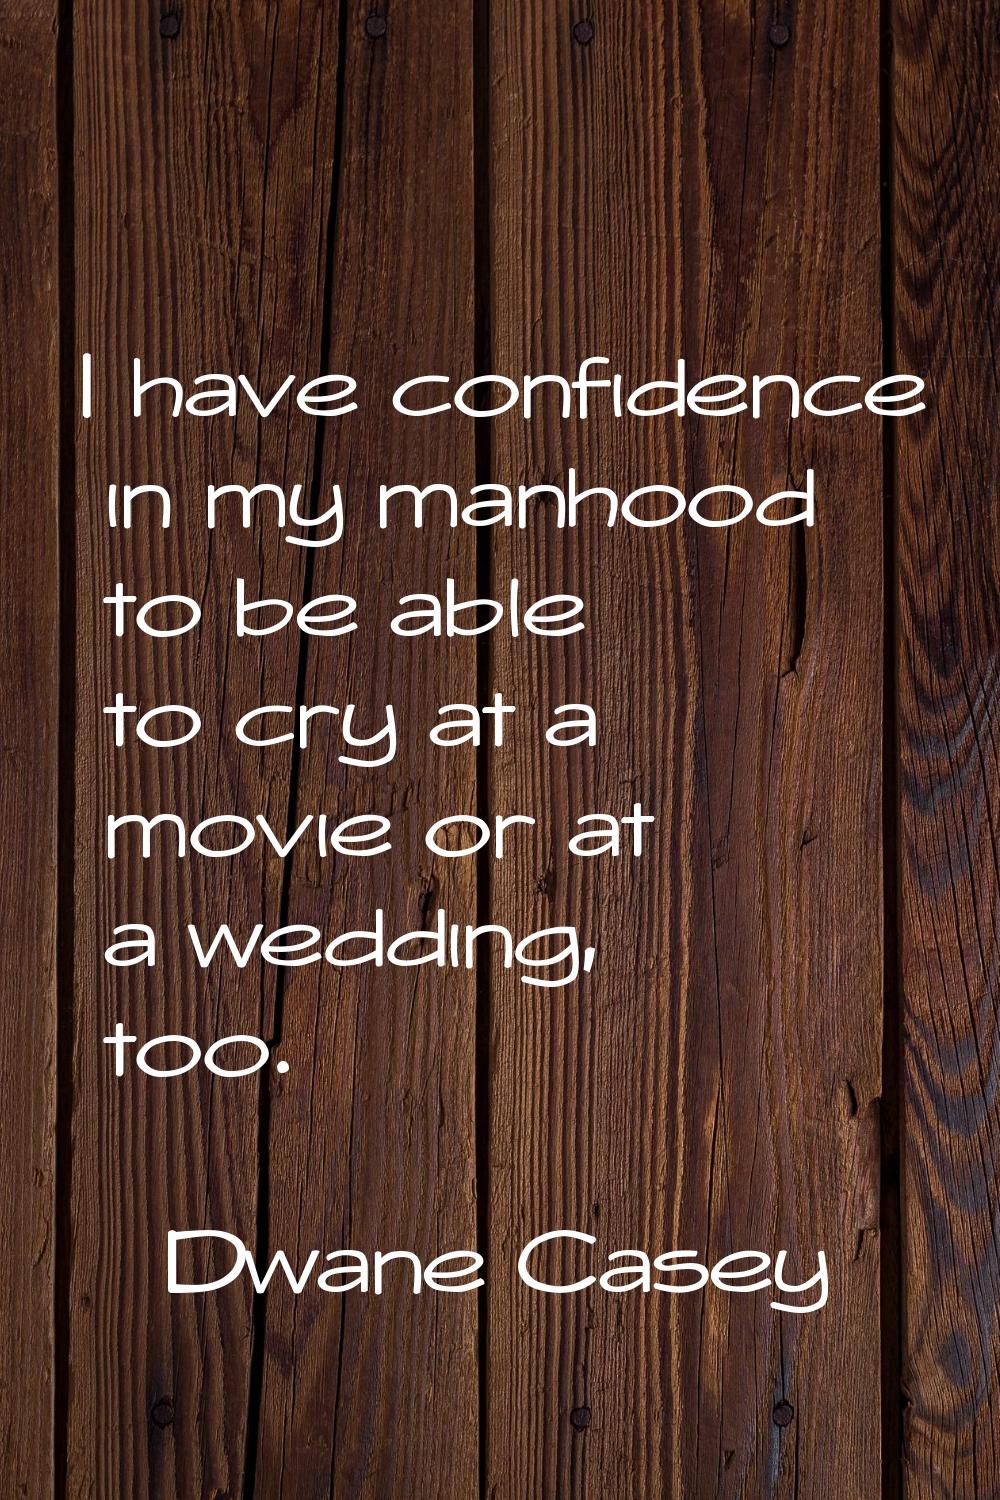 I have confidence in my manhood to be able to cry at a movie or at a wedding, too.